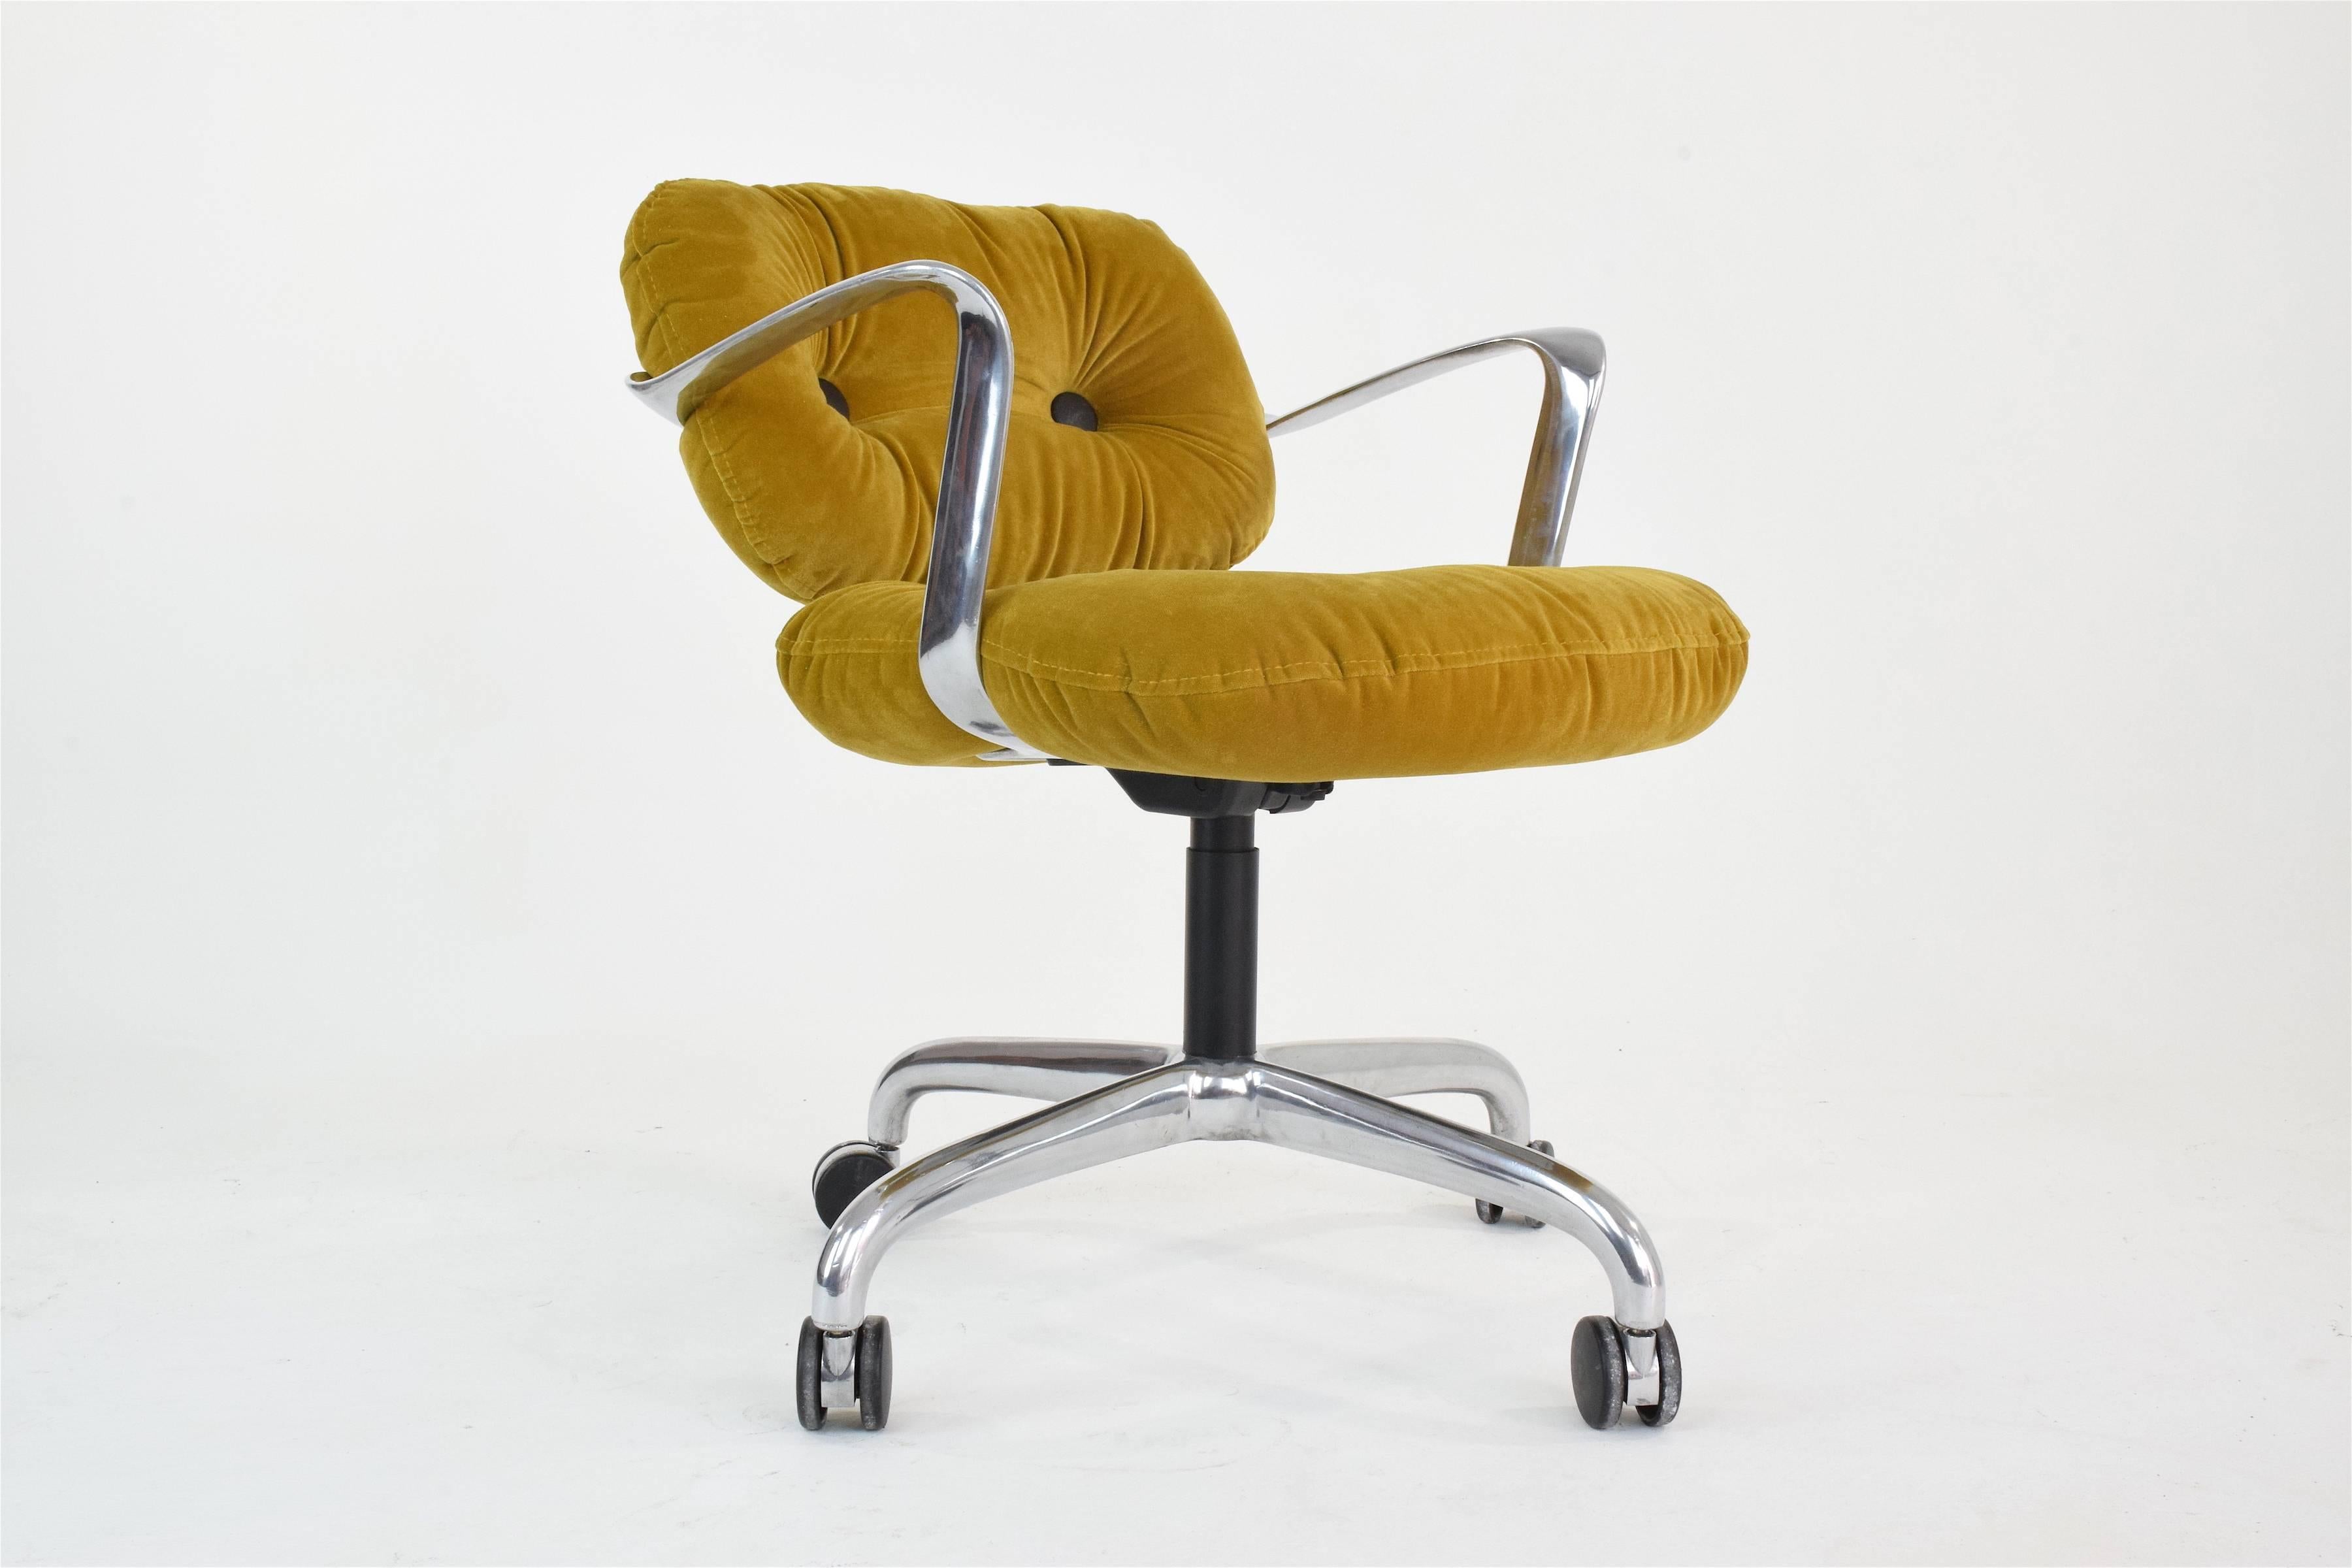 Superb desk chair designed in the USA by Bruce Hannah and Andrew Morrison for Knoll in the 1950s-1960s composed of a meticulously polished aluminium structure with swivel base on rollers and reupholstered with a luxurious Lelièvre Paris mustard